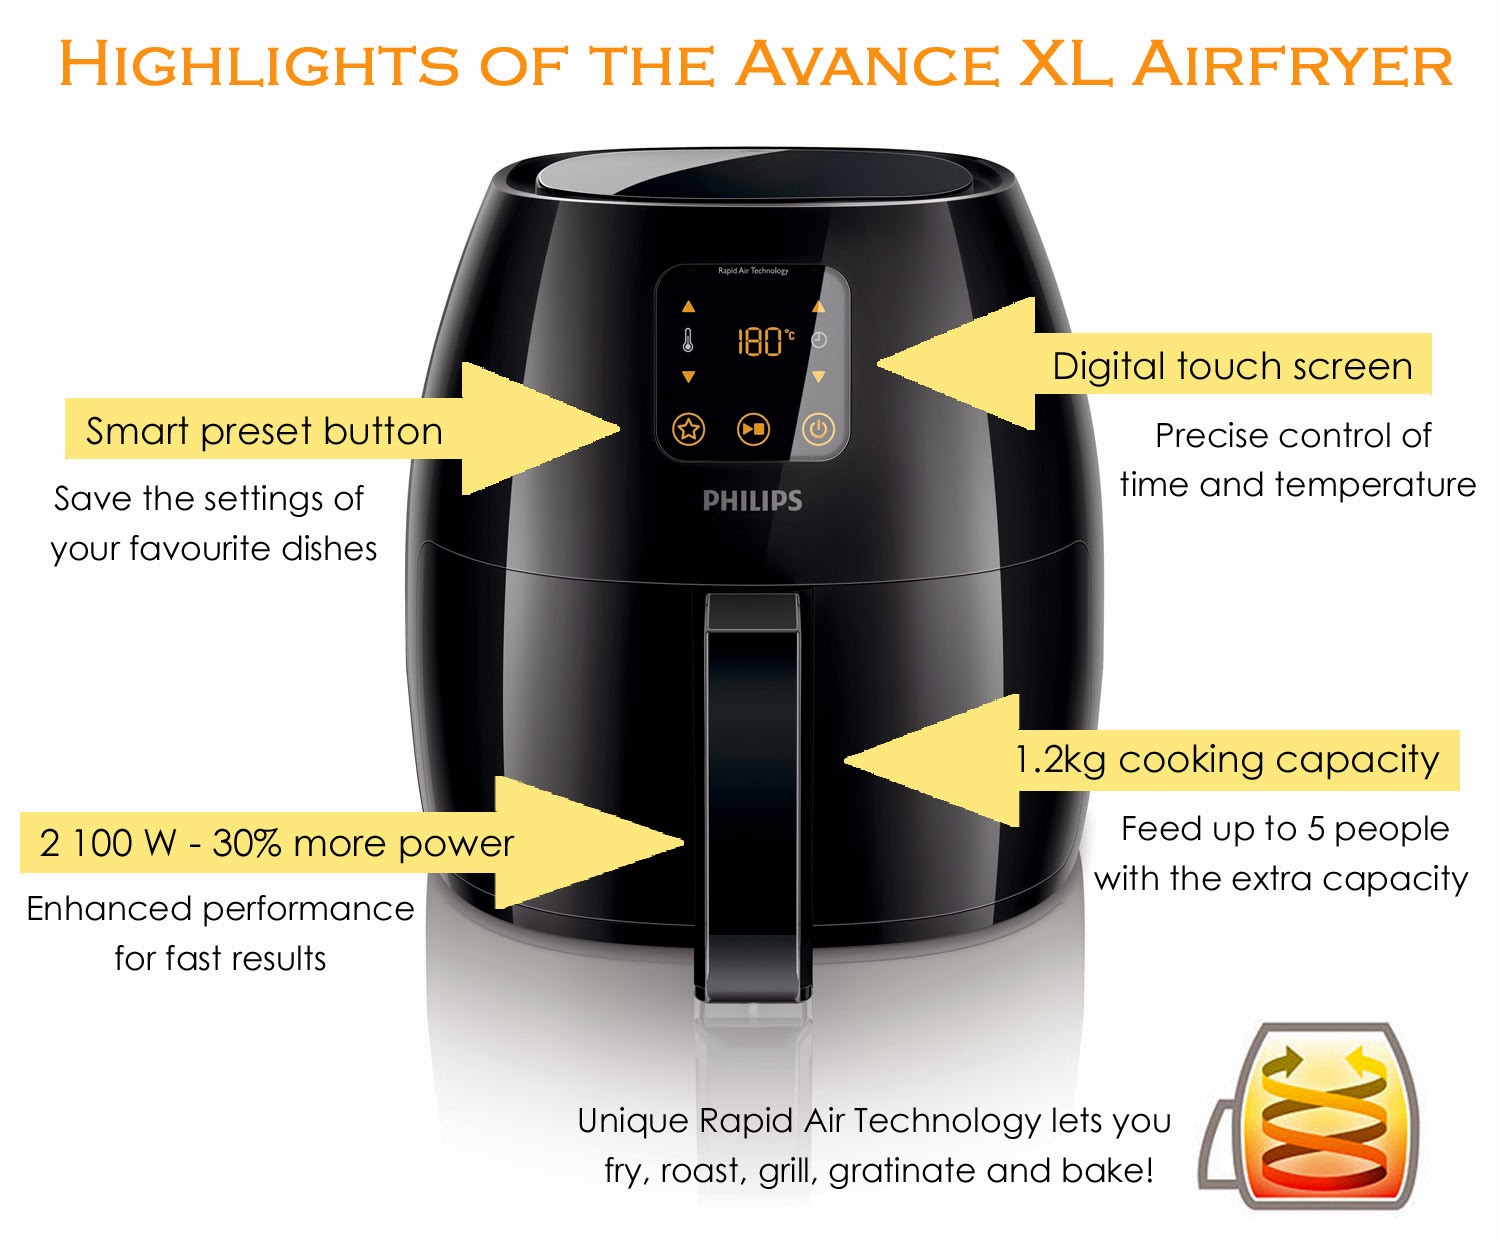 Find out 'What's new on the menu' with the Philips Airfryer's